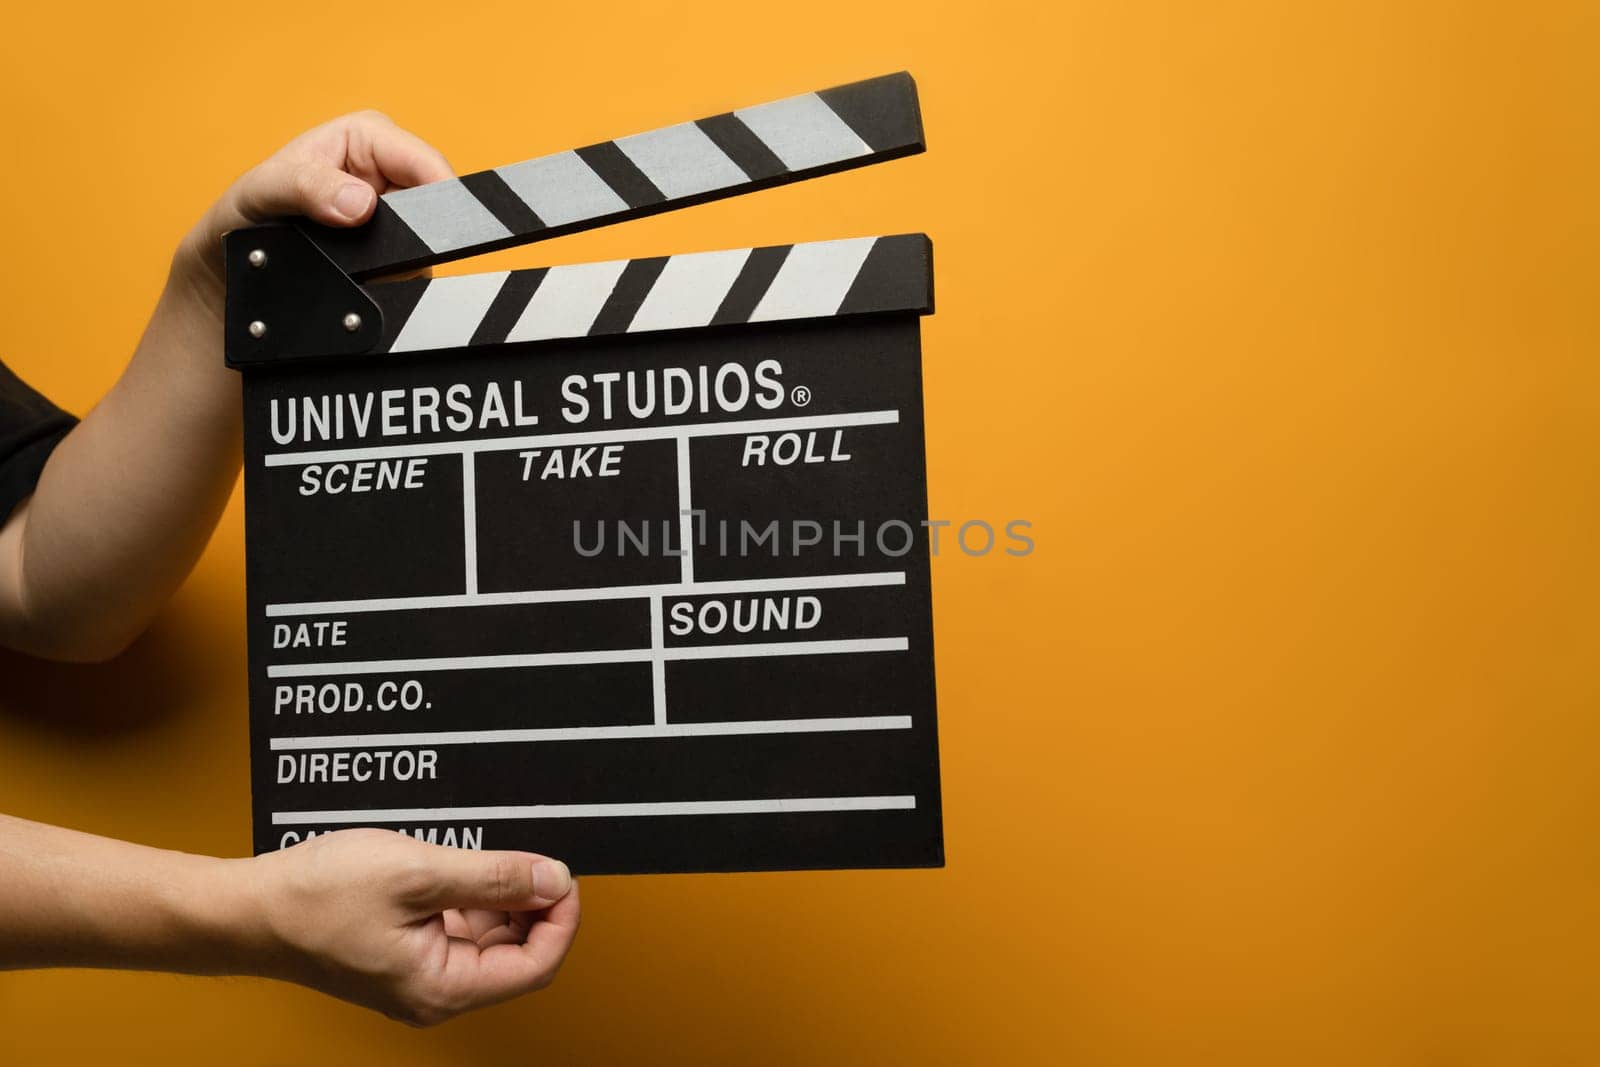 Hands holding black clapperboard on yellow background. Video production, film, cinema industry concept.